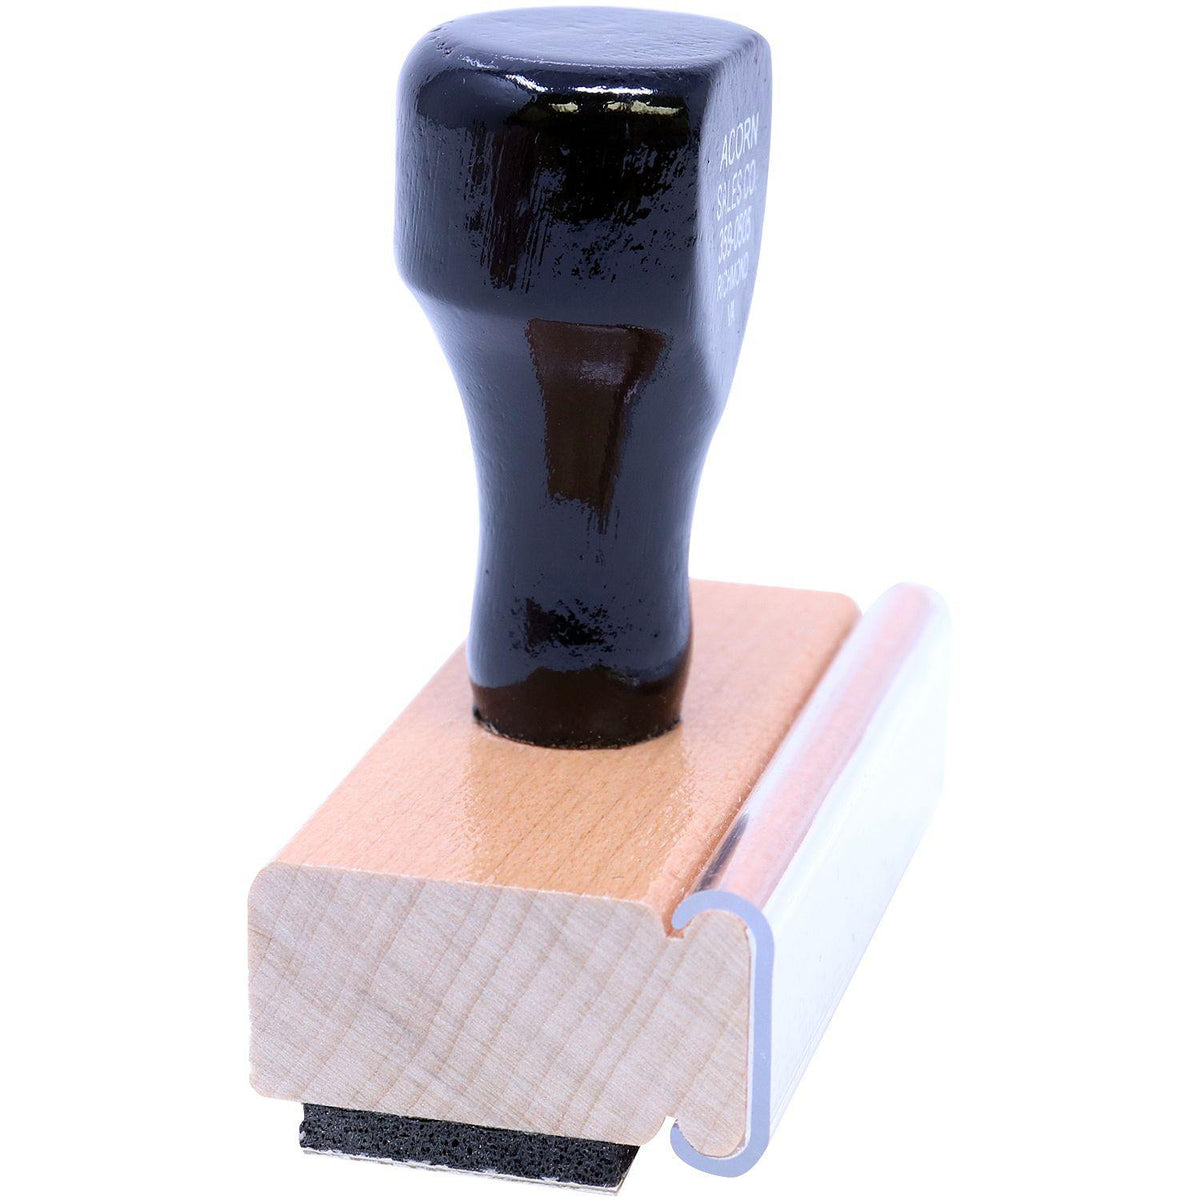 Side View of Teacher Stamp WOW Rubber Stamp at an Angle